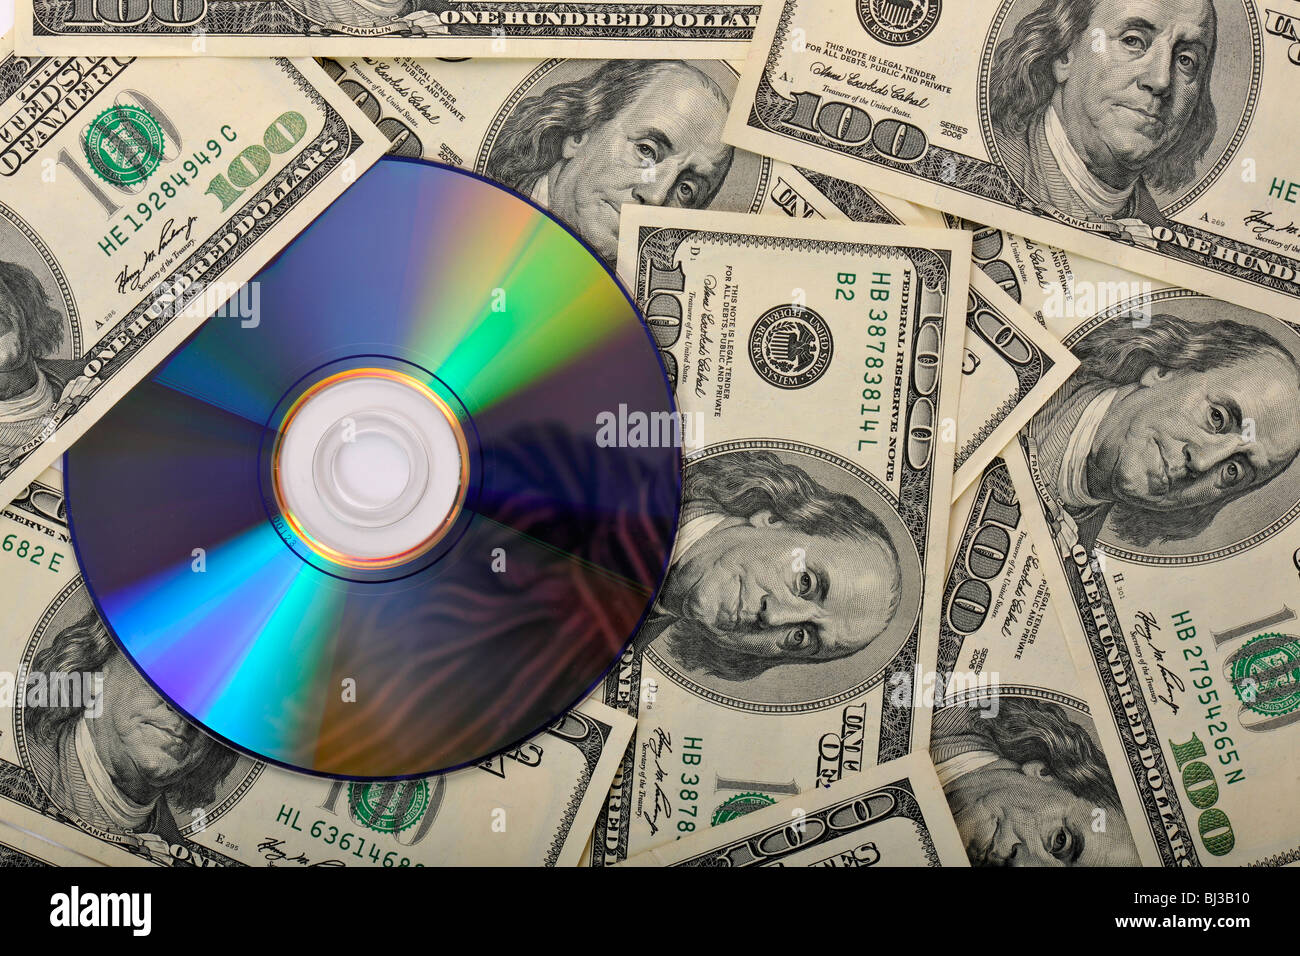 DVD, CD, 100-dollar bills, symbolic image for the purchase of bank records, tax evasion, privacy Stock Photo